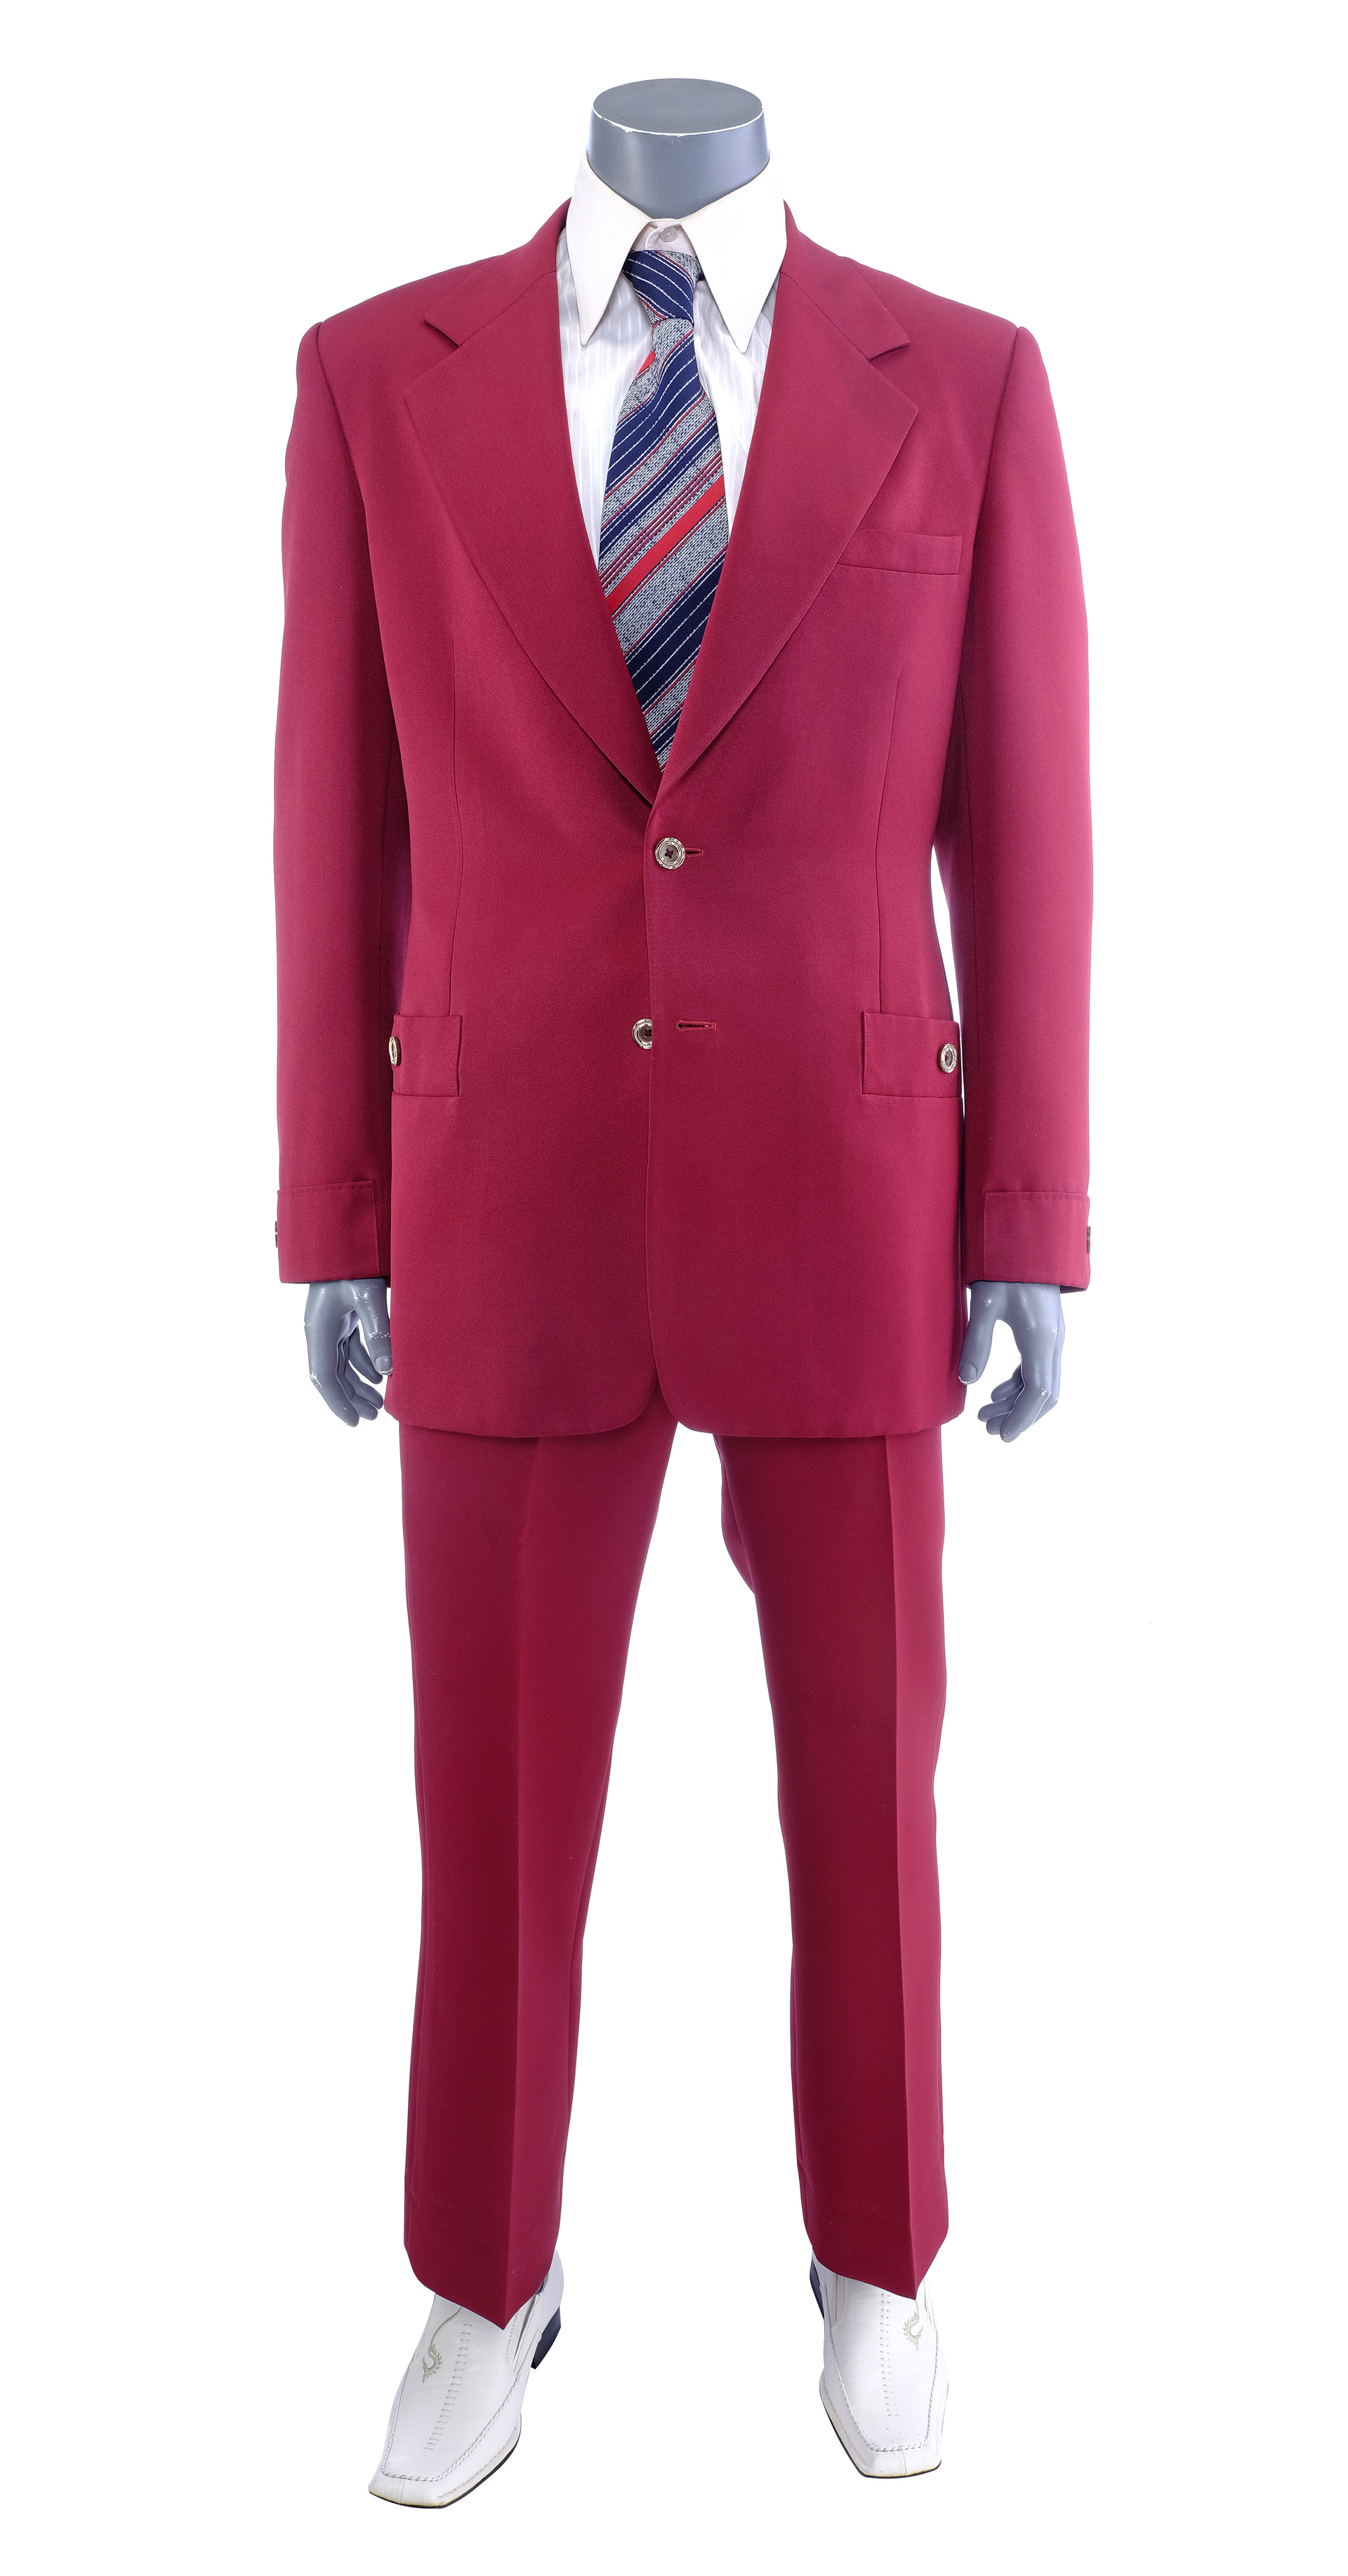 ANCHORMAN: THE LEGEND OF RON BURGUNDY - Ron Burgundy's (Will Ferrell) Suit